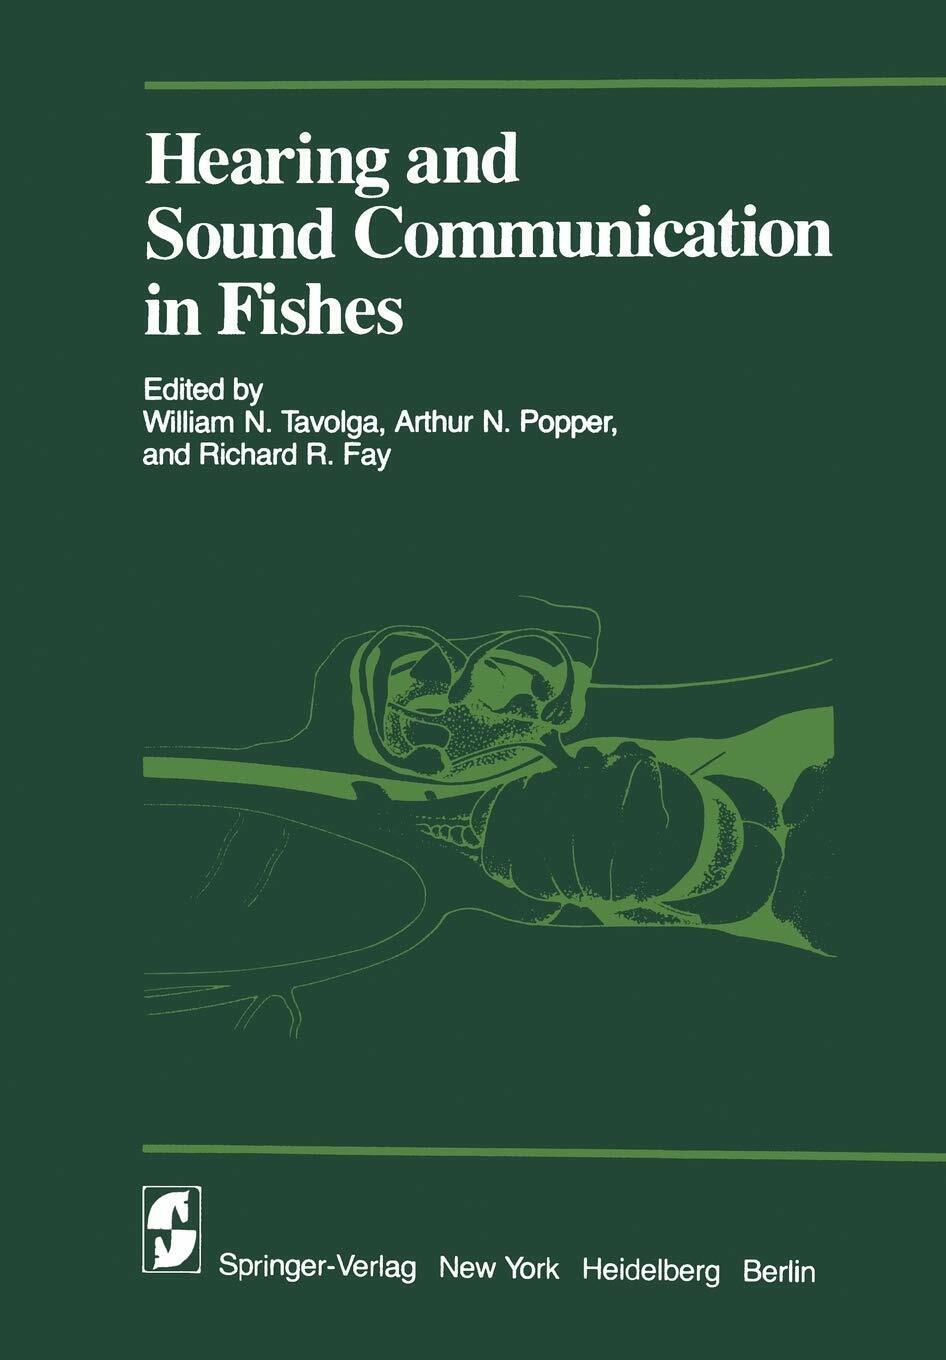 Hearing and Sound Communication in Fishes -  W.N. Tavolga - Springer, 1981